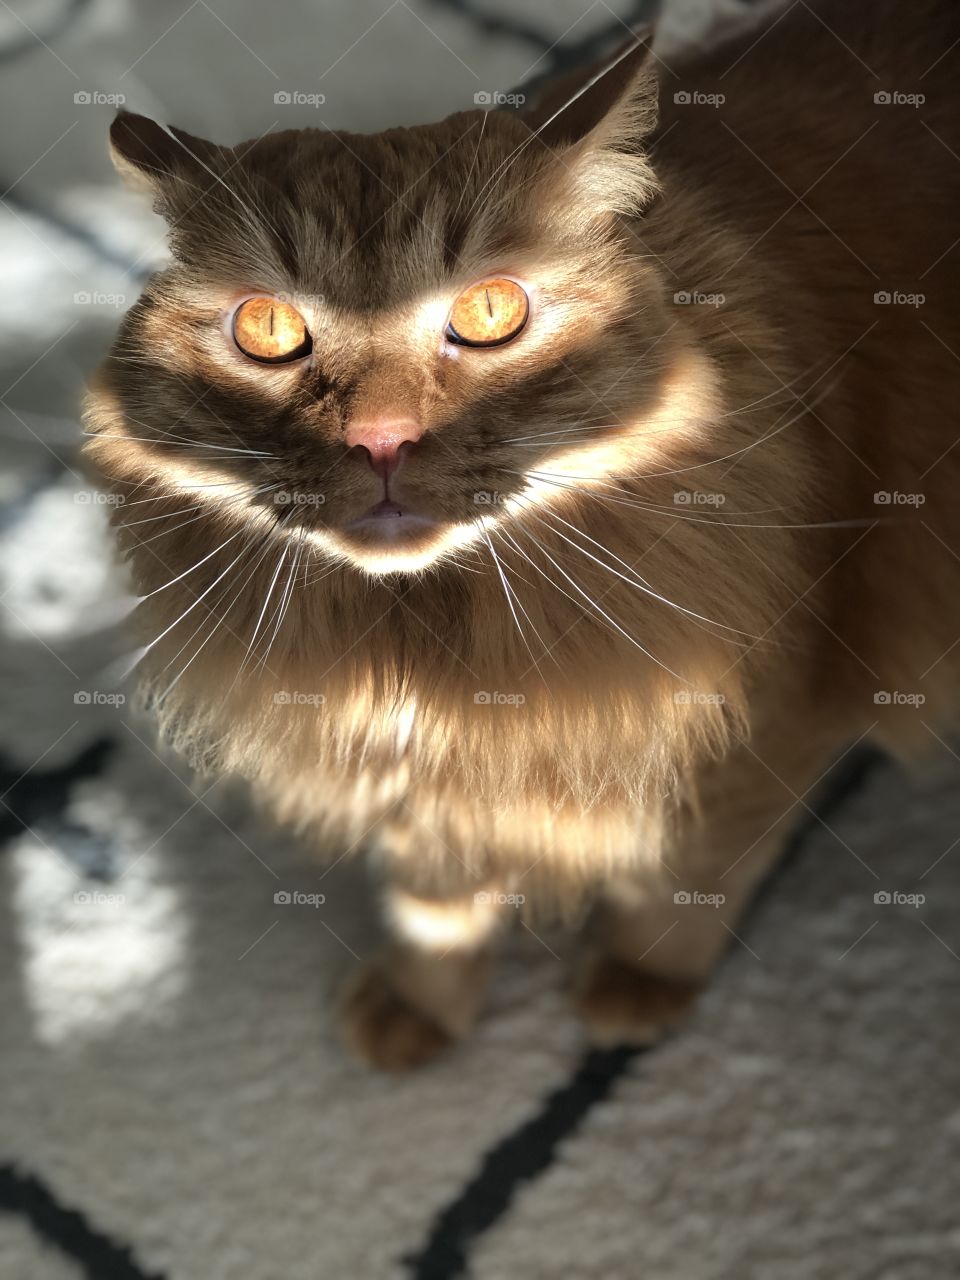 Orange cat, with orange eyes,  with light from window across face.